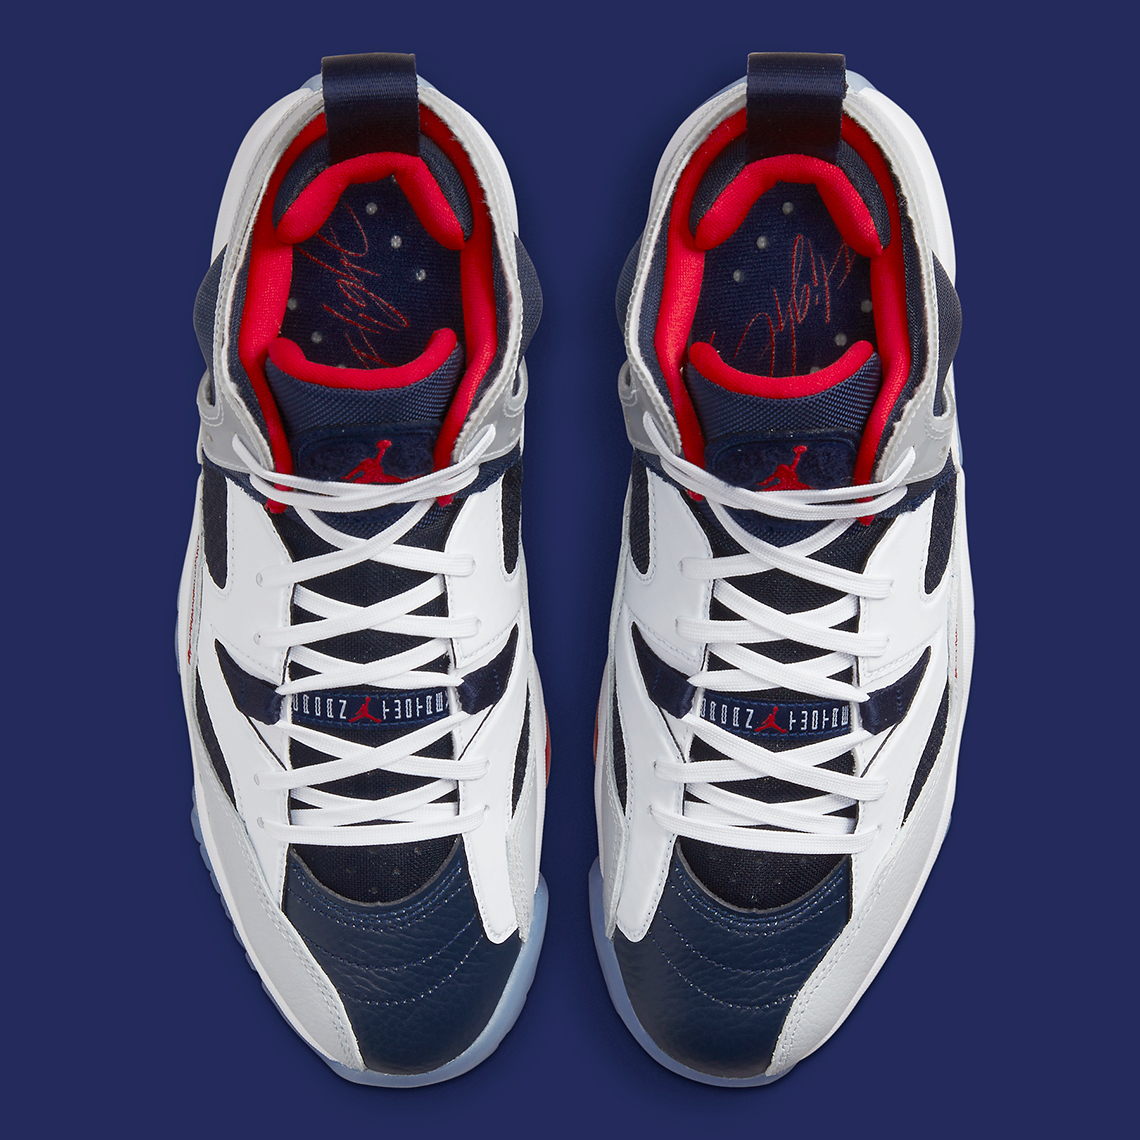 Where To Buy The Long-Awaited Solefly x Air jordan the 1 Low Olympic Do1925 101 5